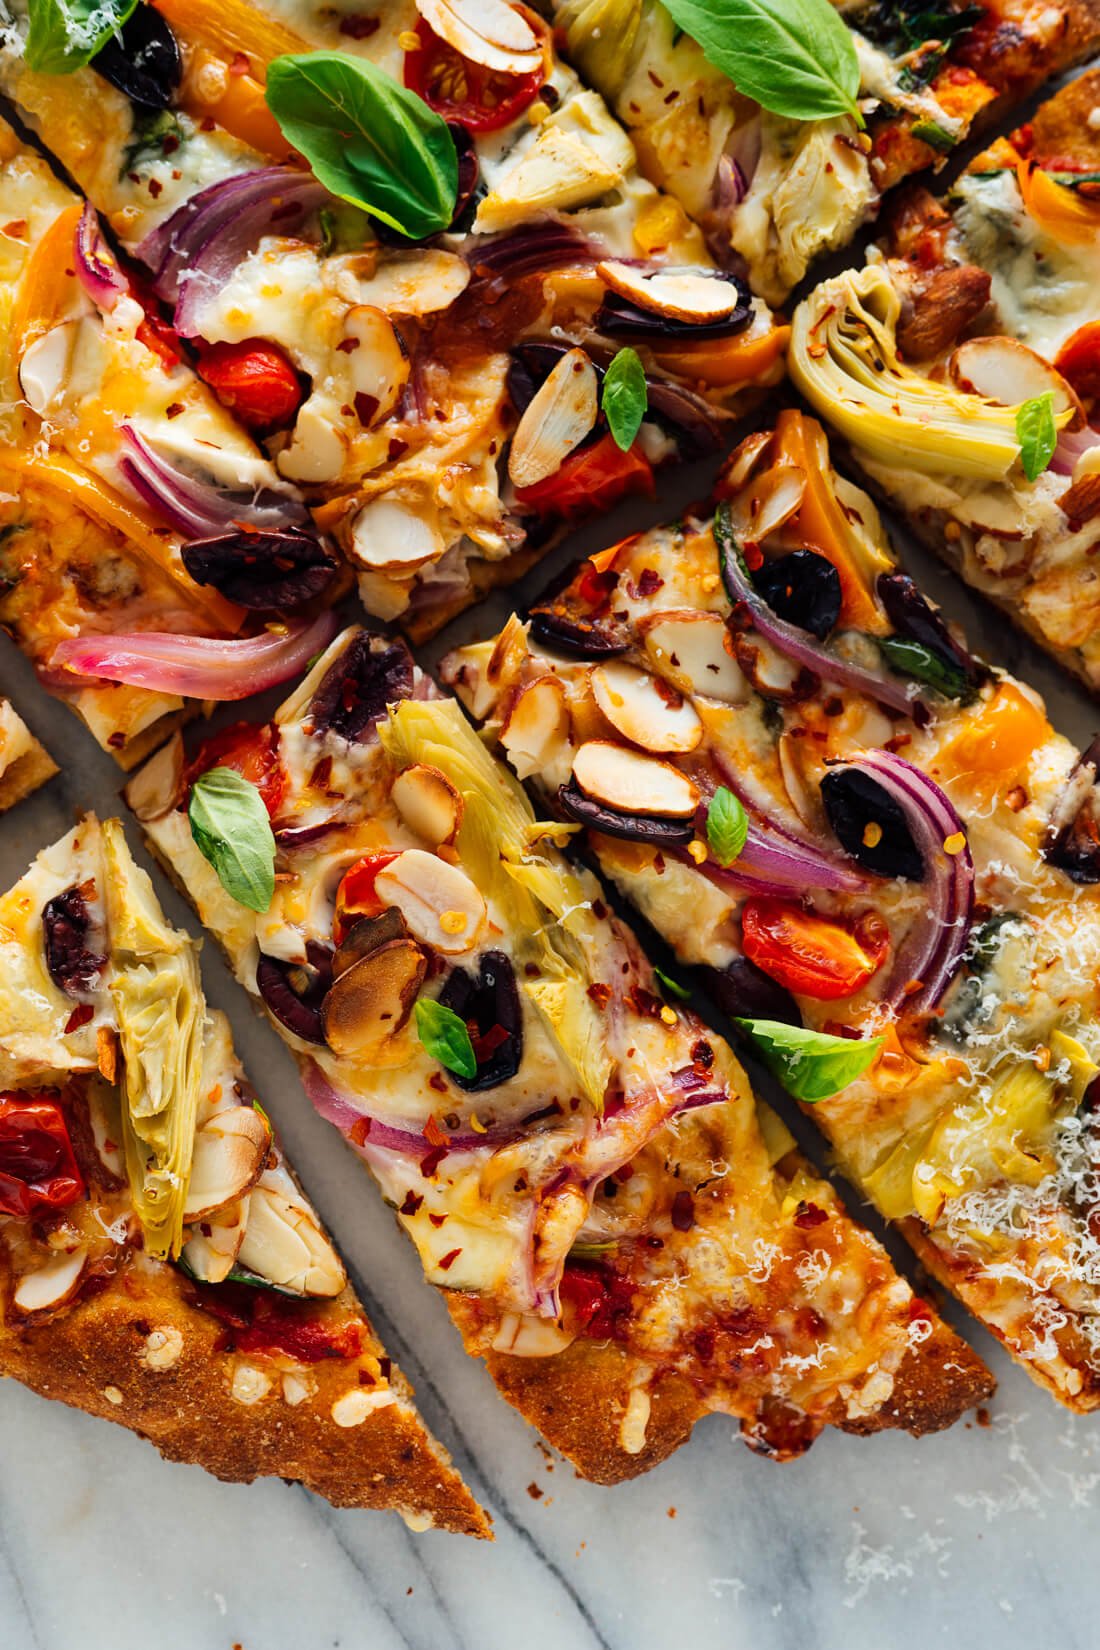 10 Inch Pizza: Sampling Personal-Sized Pizza Options